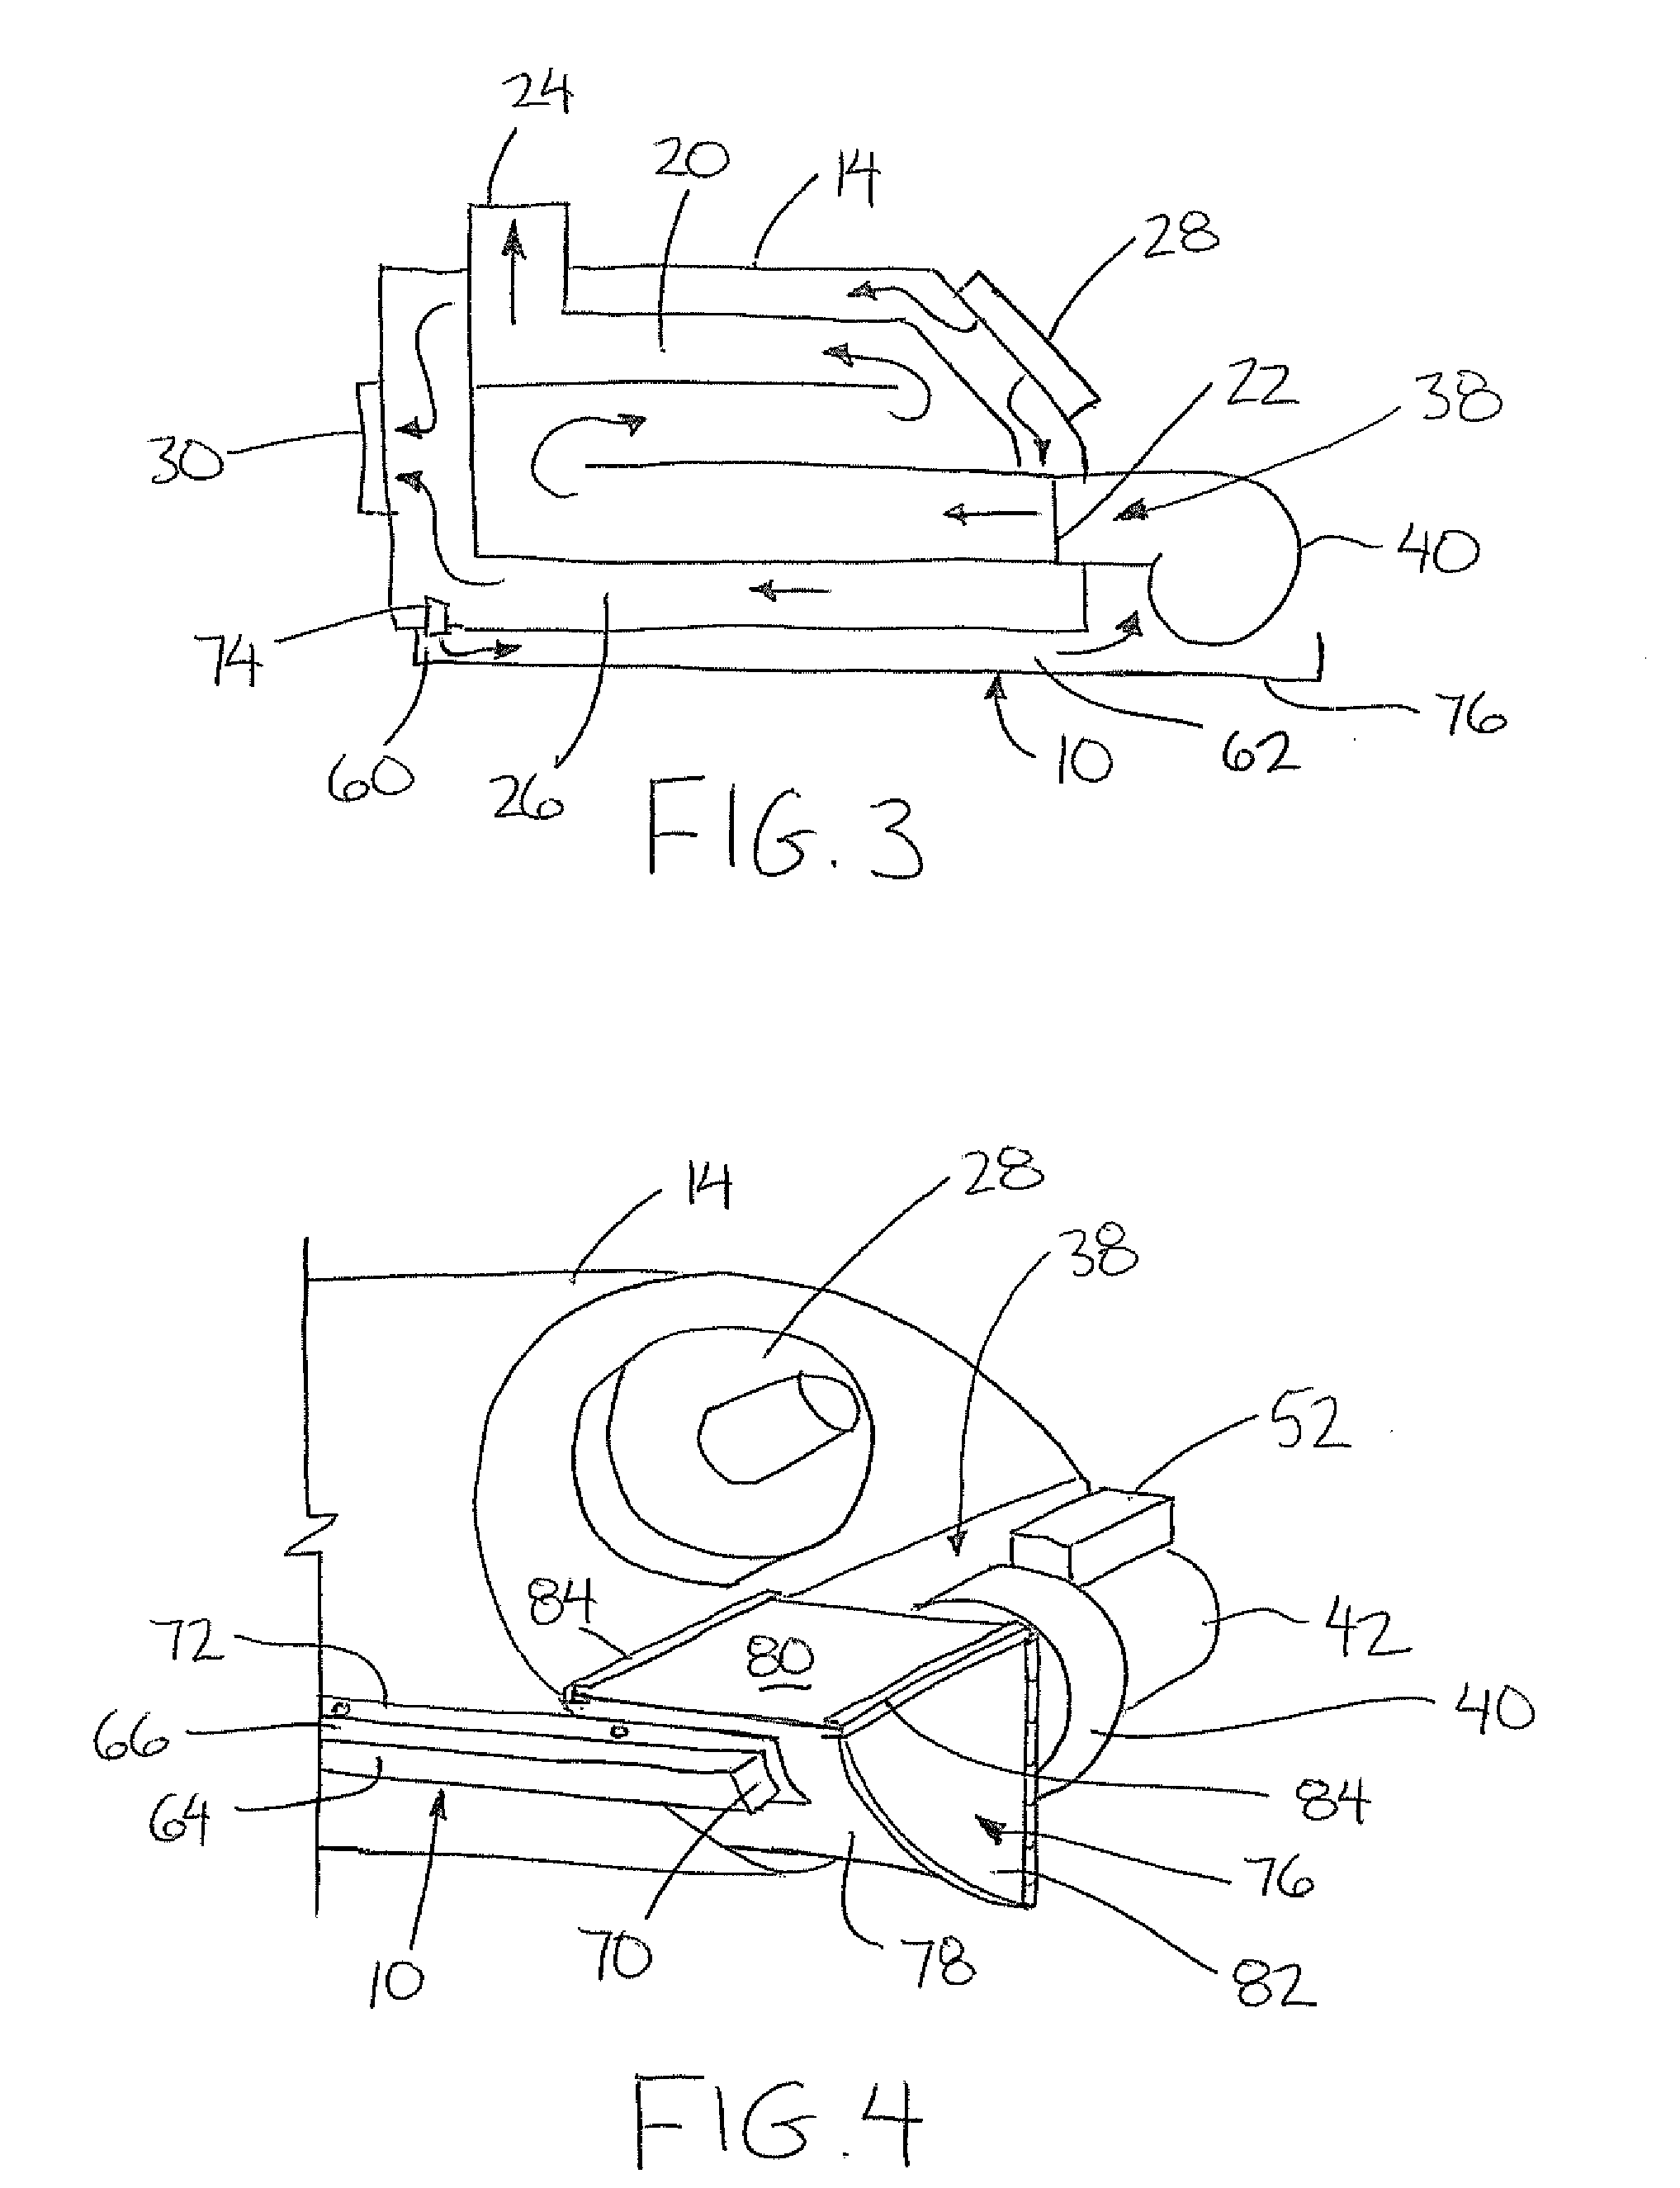 Auxiliary Heating Duct for an Indirect Fired Heater